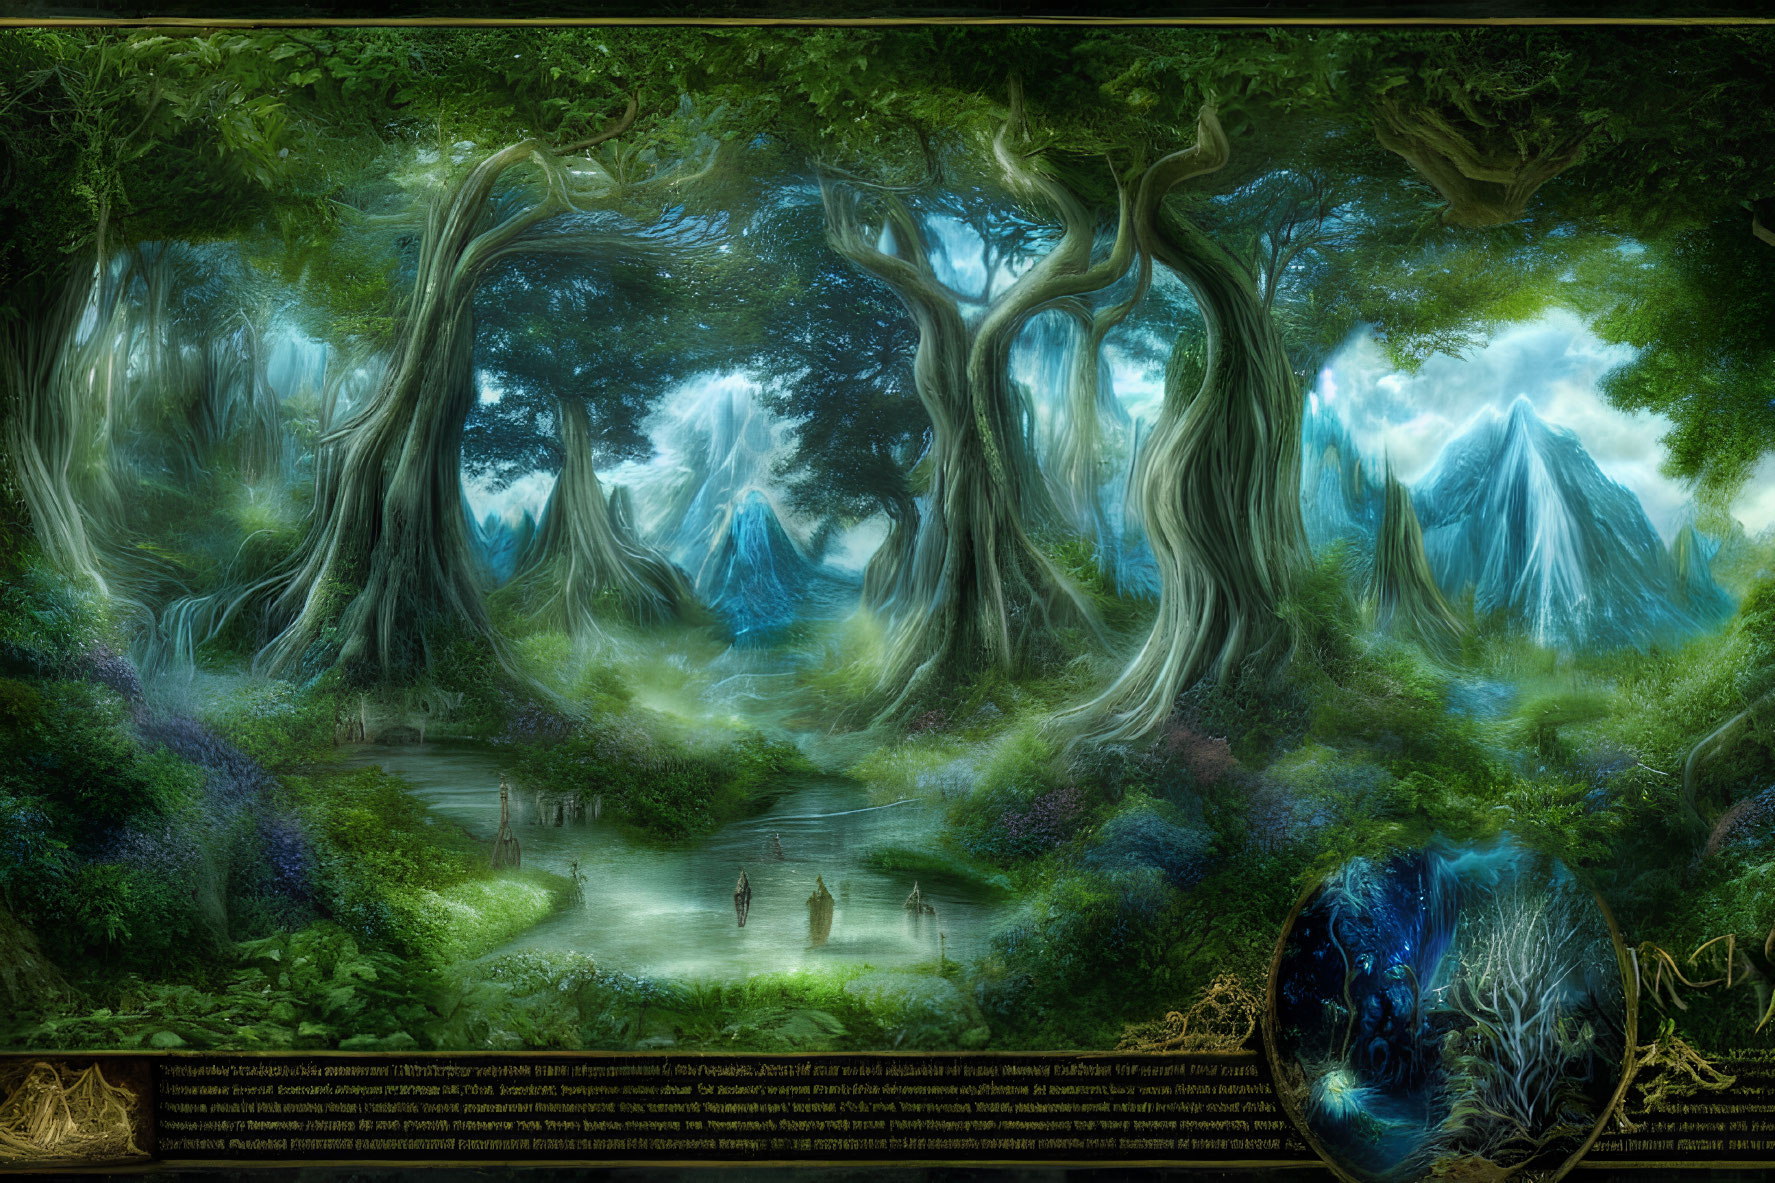 Fantasy forest with intertwined trees, misty river, icy mountains, and mystical symbols.